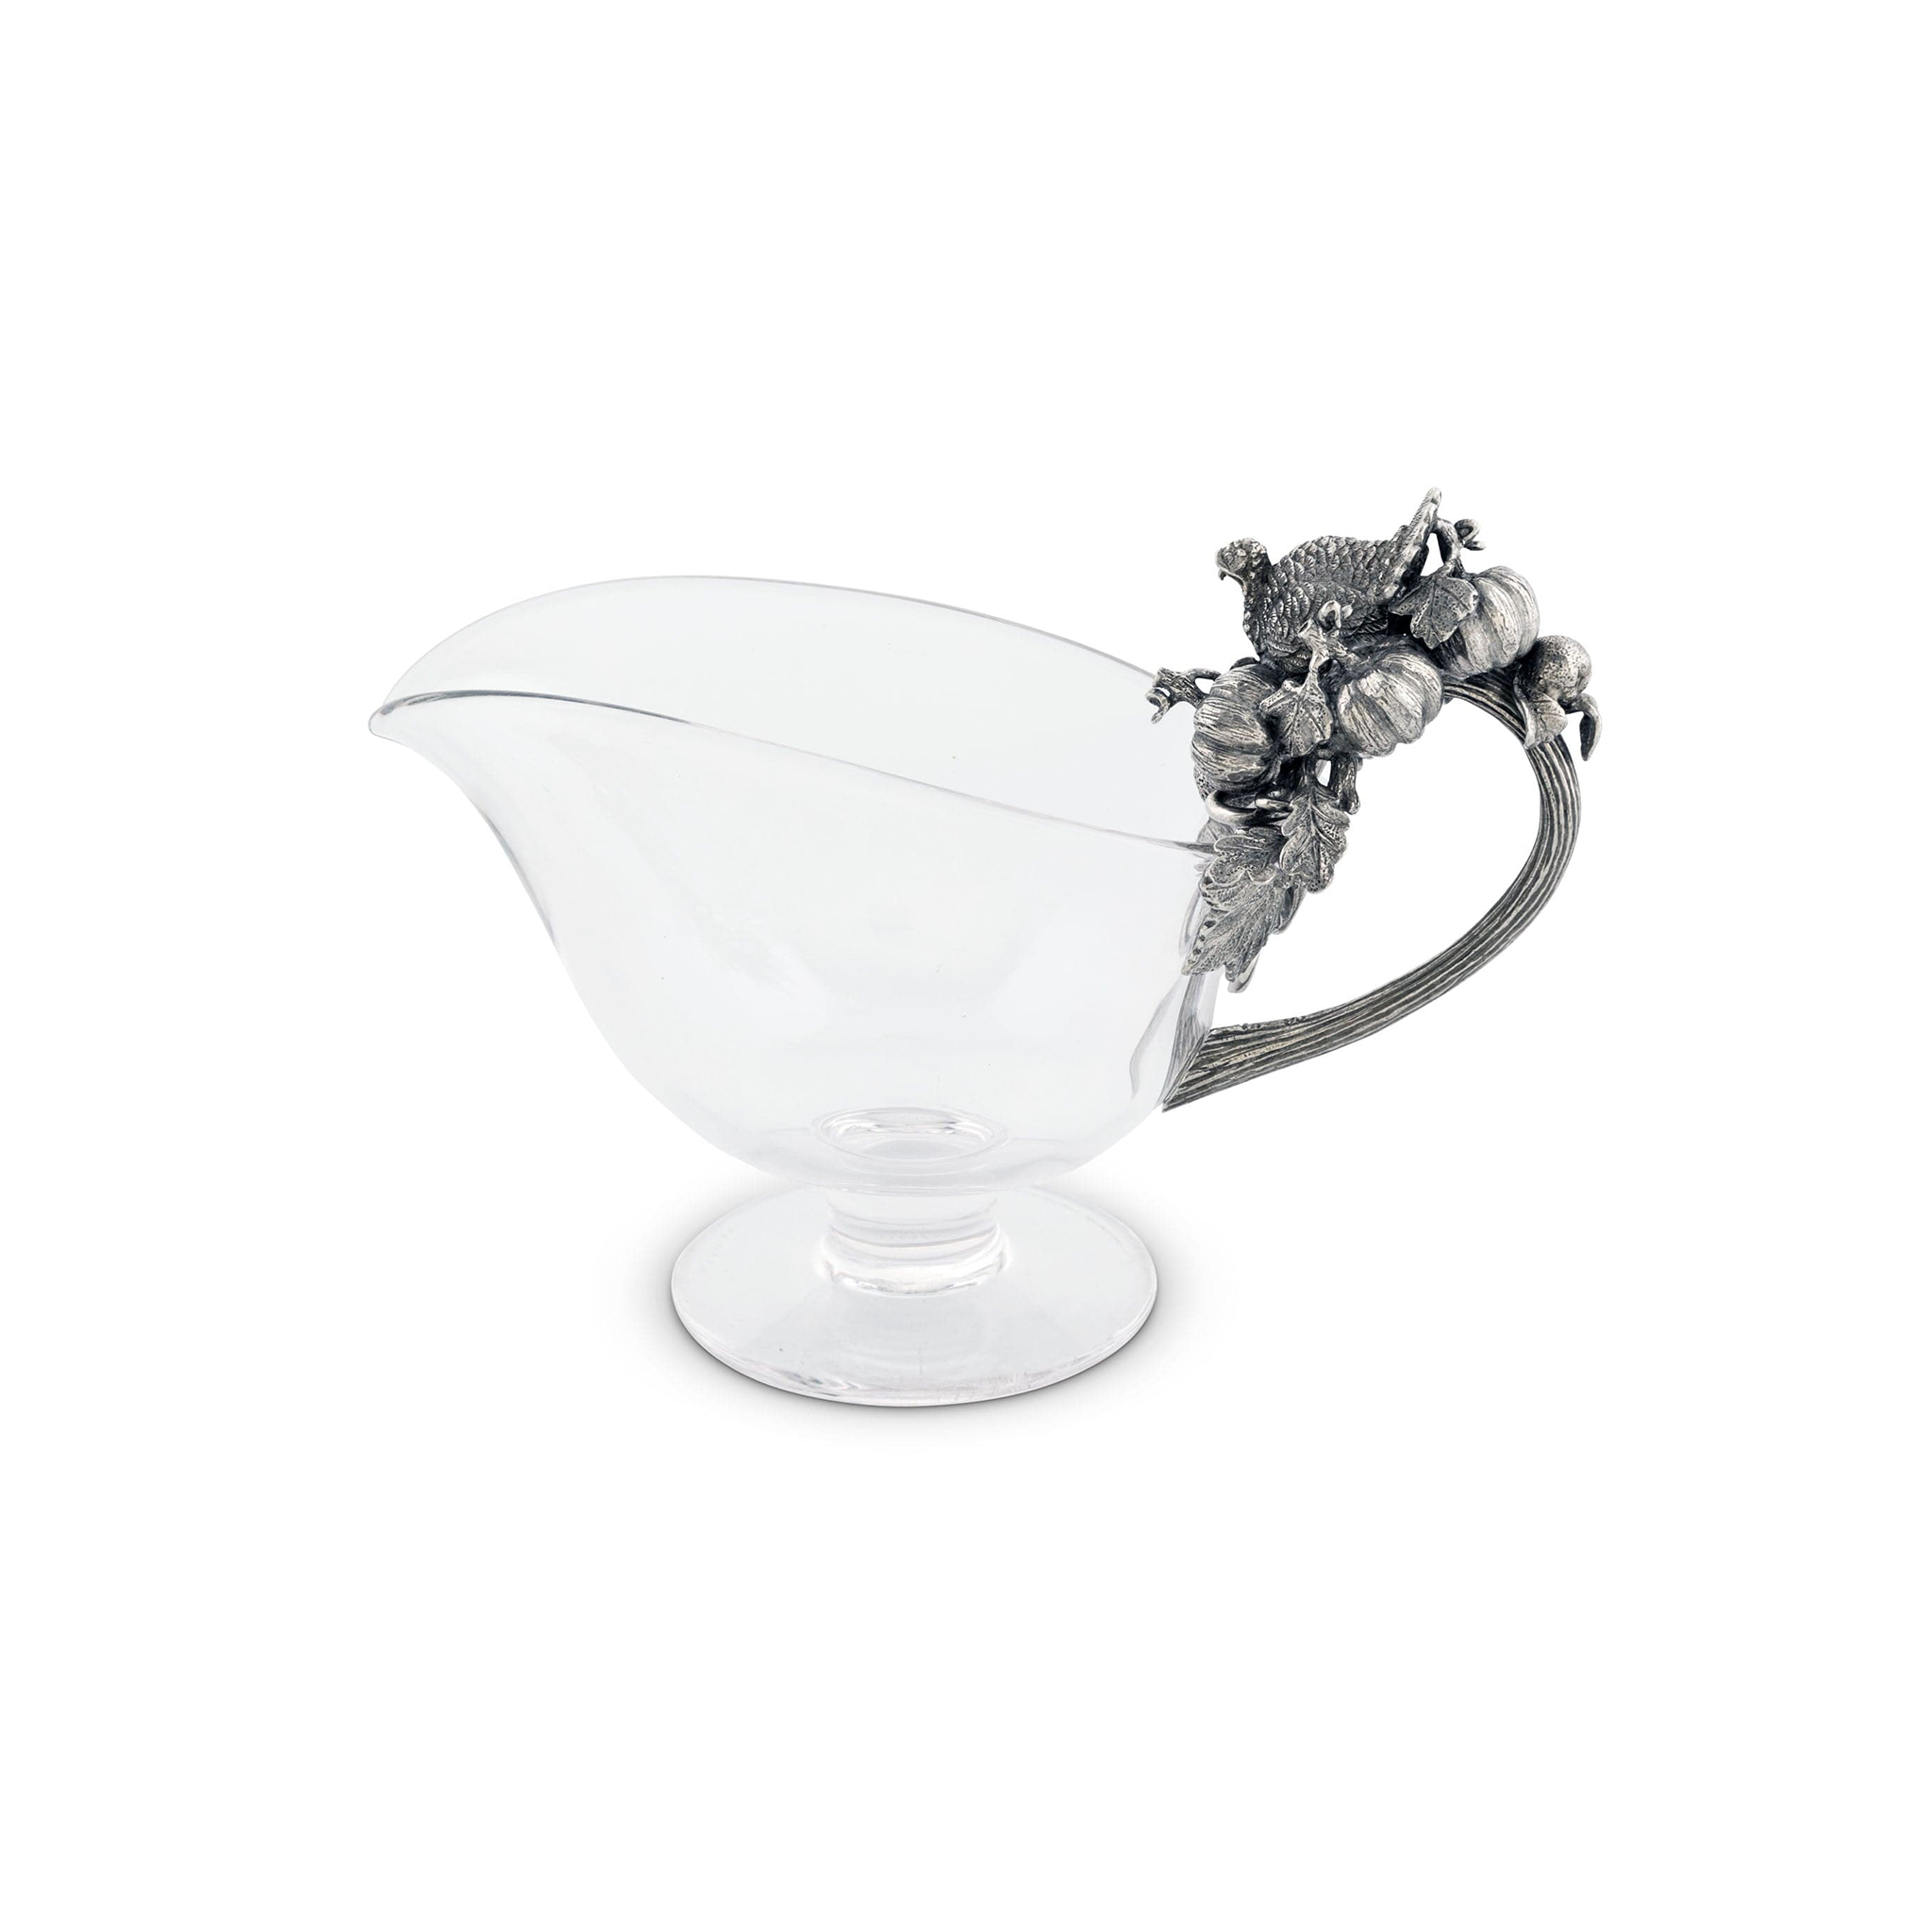 a side view of a glass gravy boat with pewter handle adorned with noble symbols of autumn's abundance